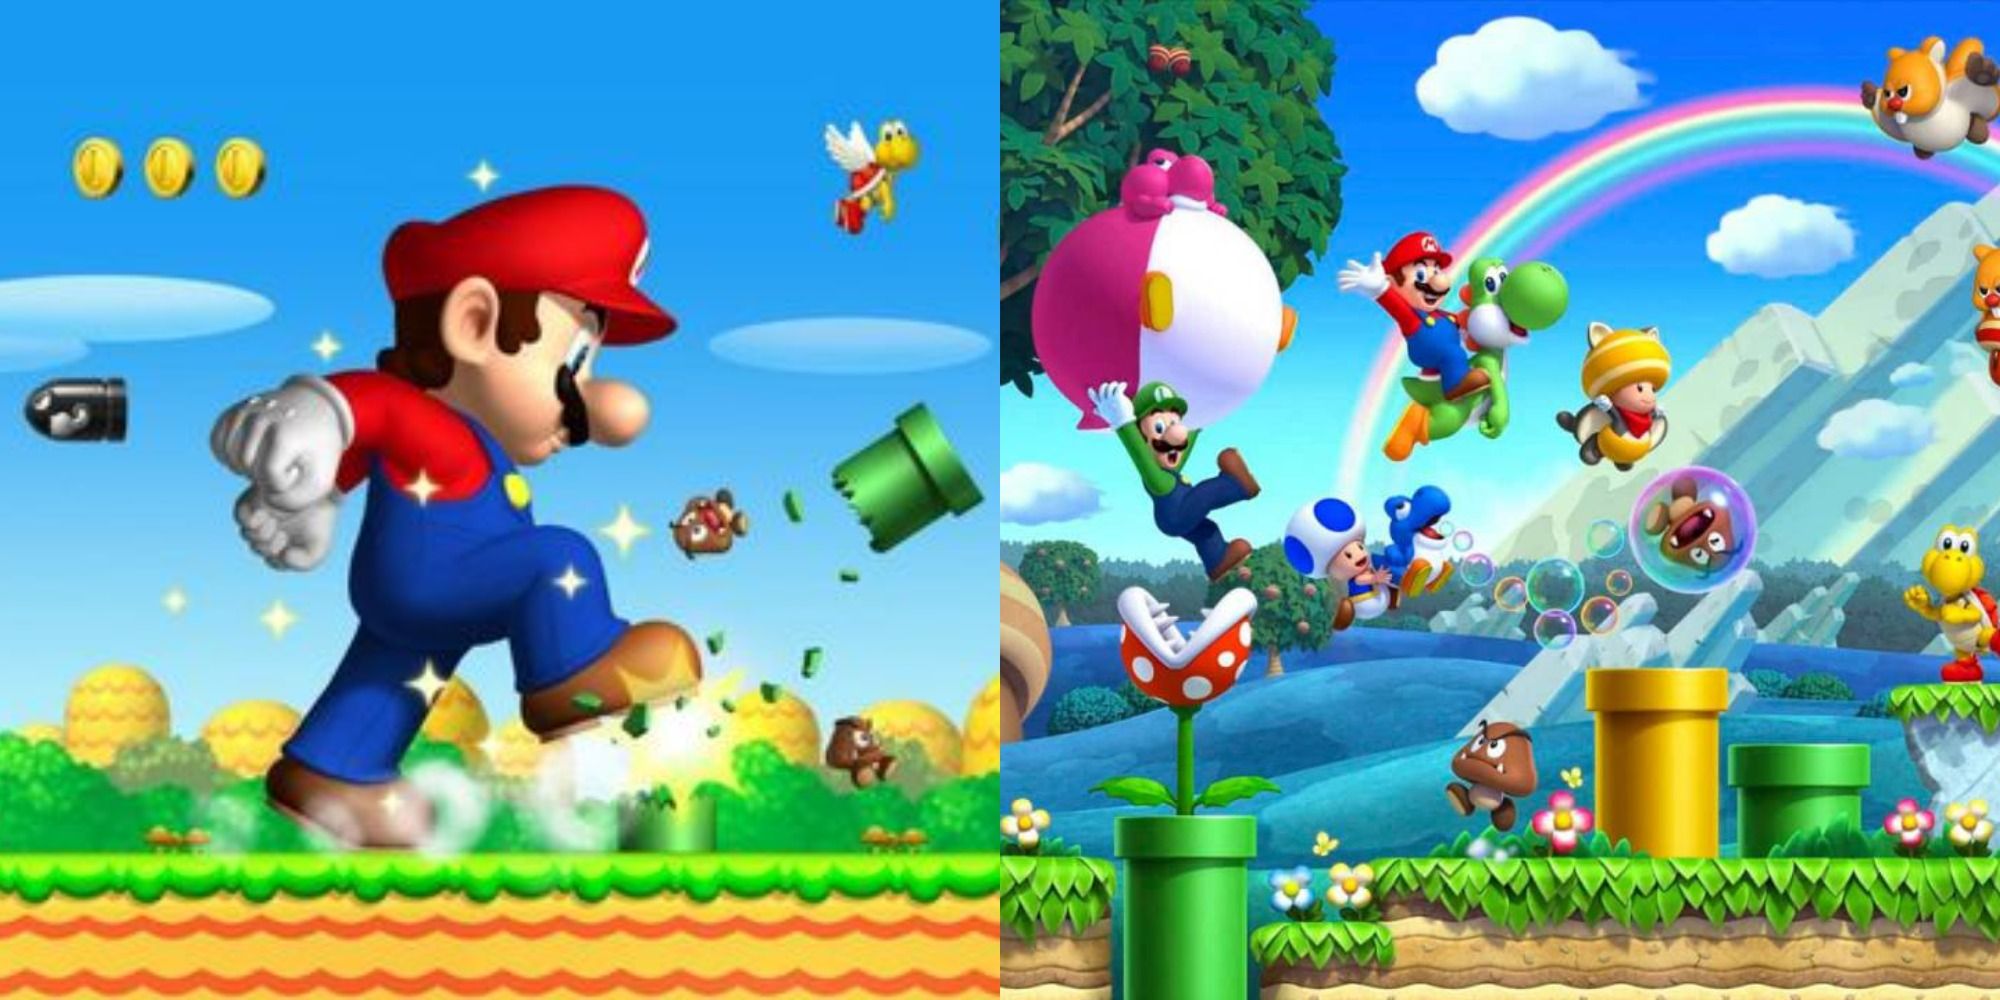 Two side by side images from Super Mario gameplay